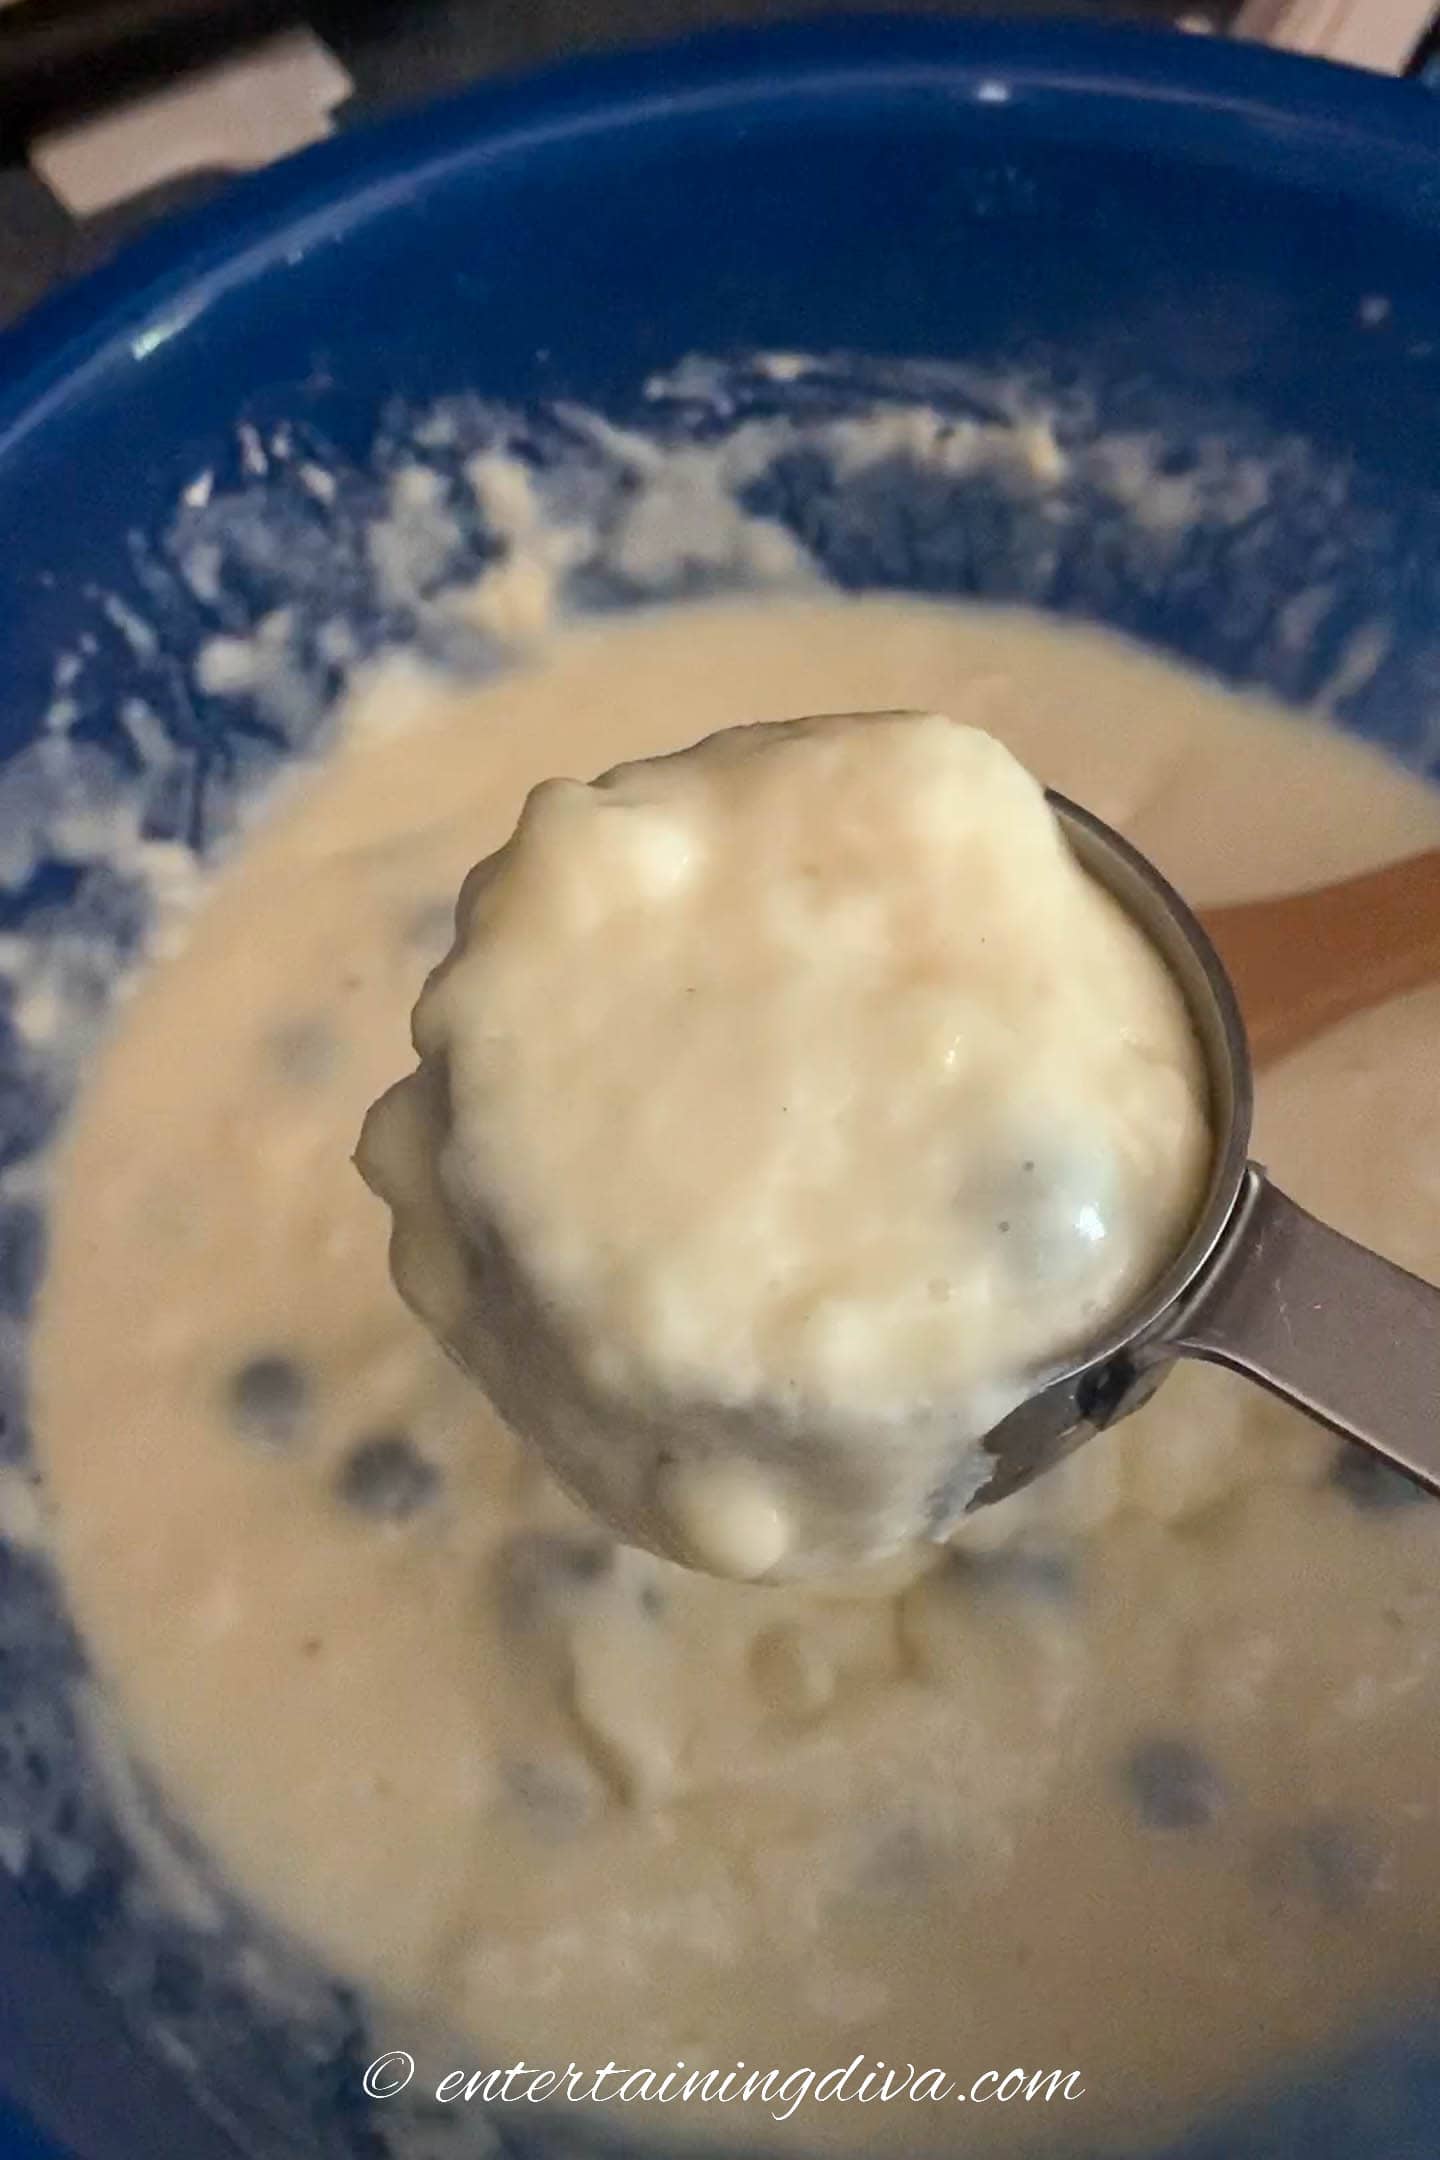 Pancake batter being scooped out of the bowl with a measuring cup